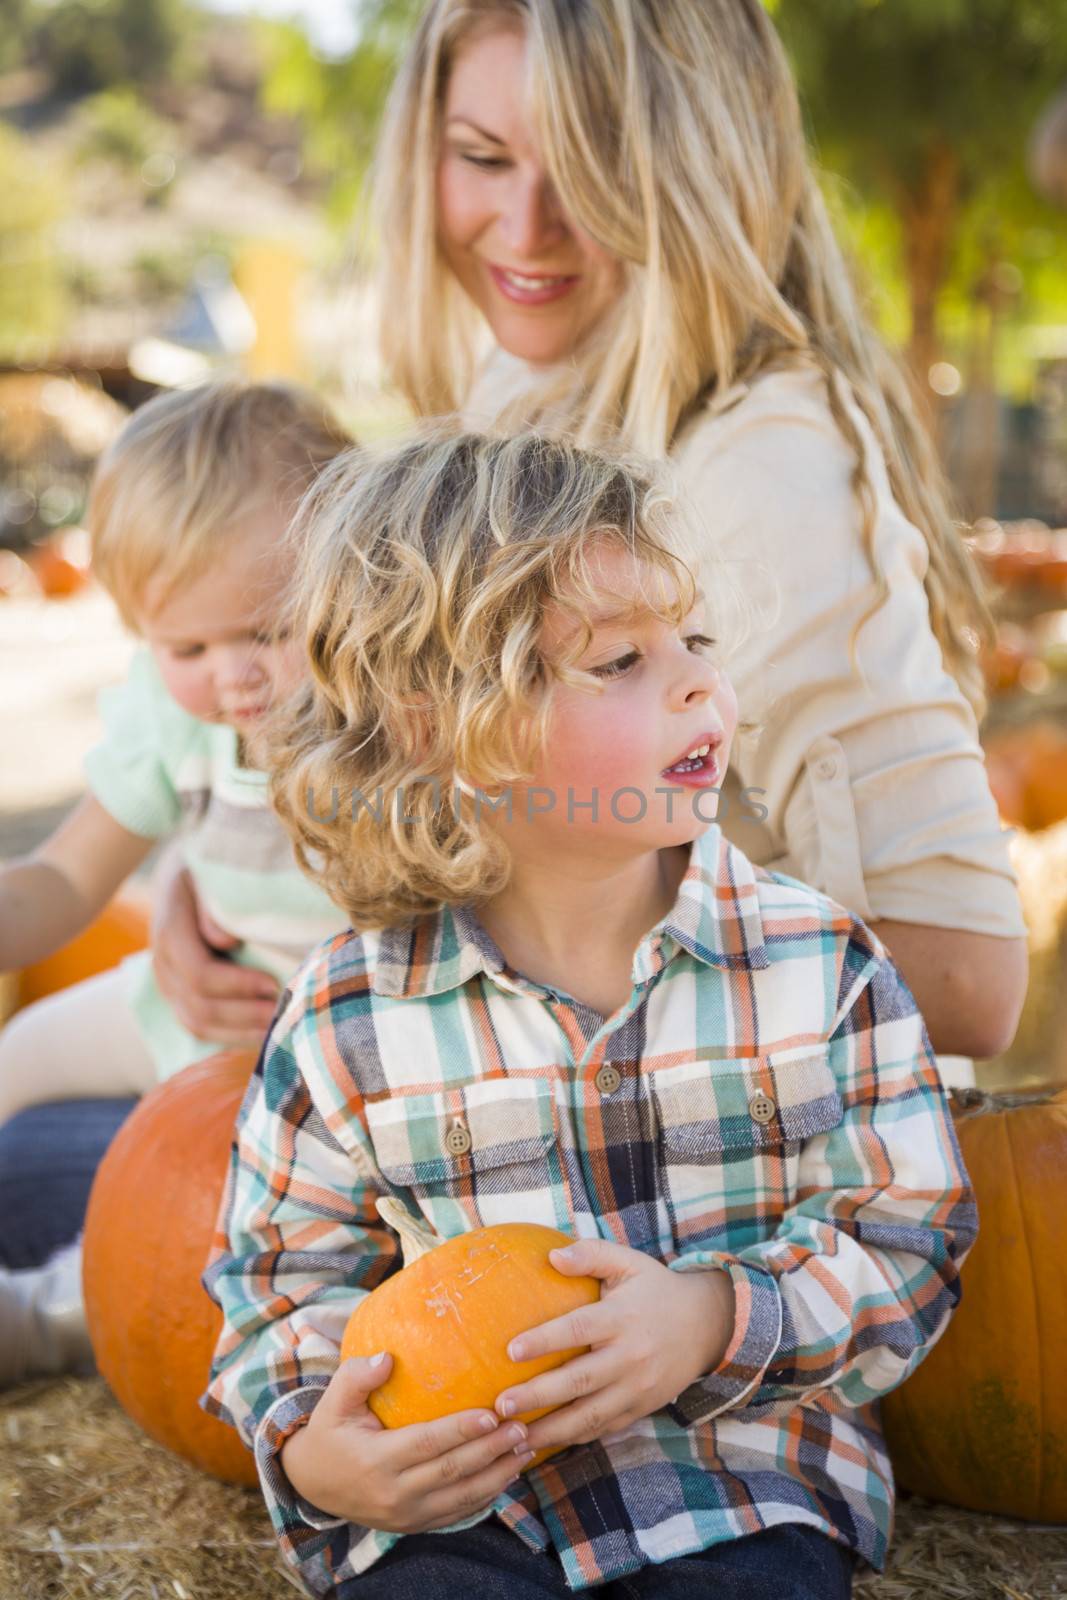 Young Family Enjoys a Day at the Pumpkin Patch by Feverpitched